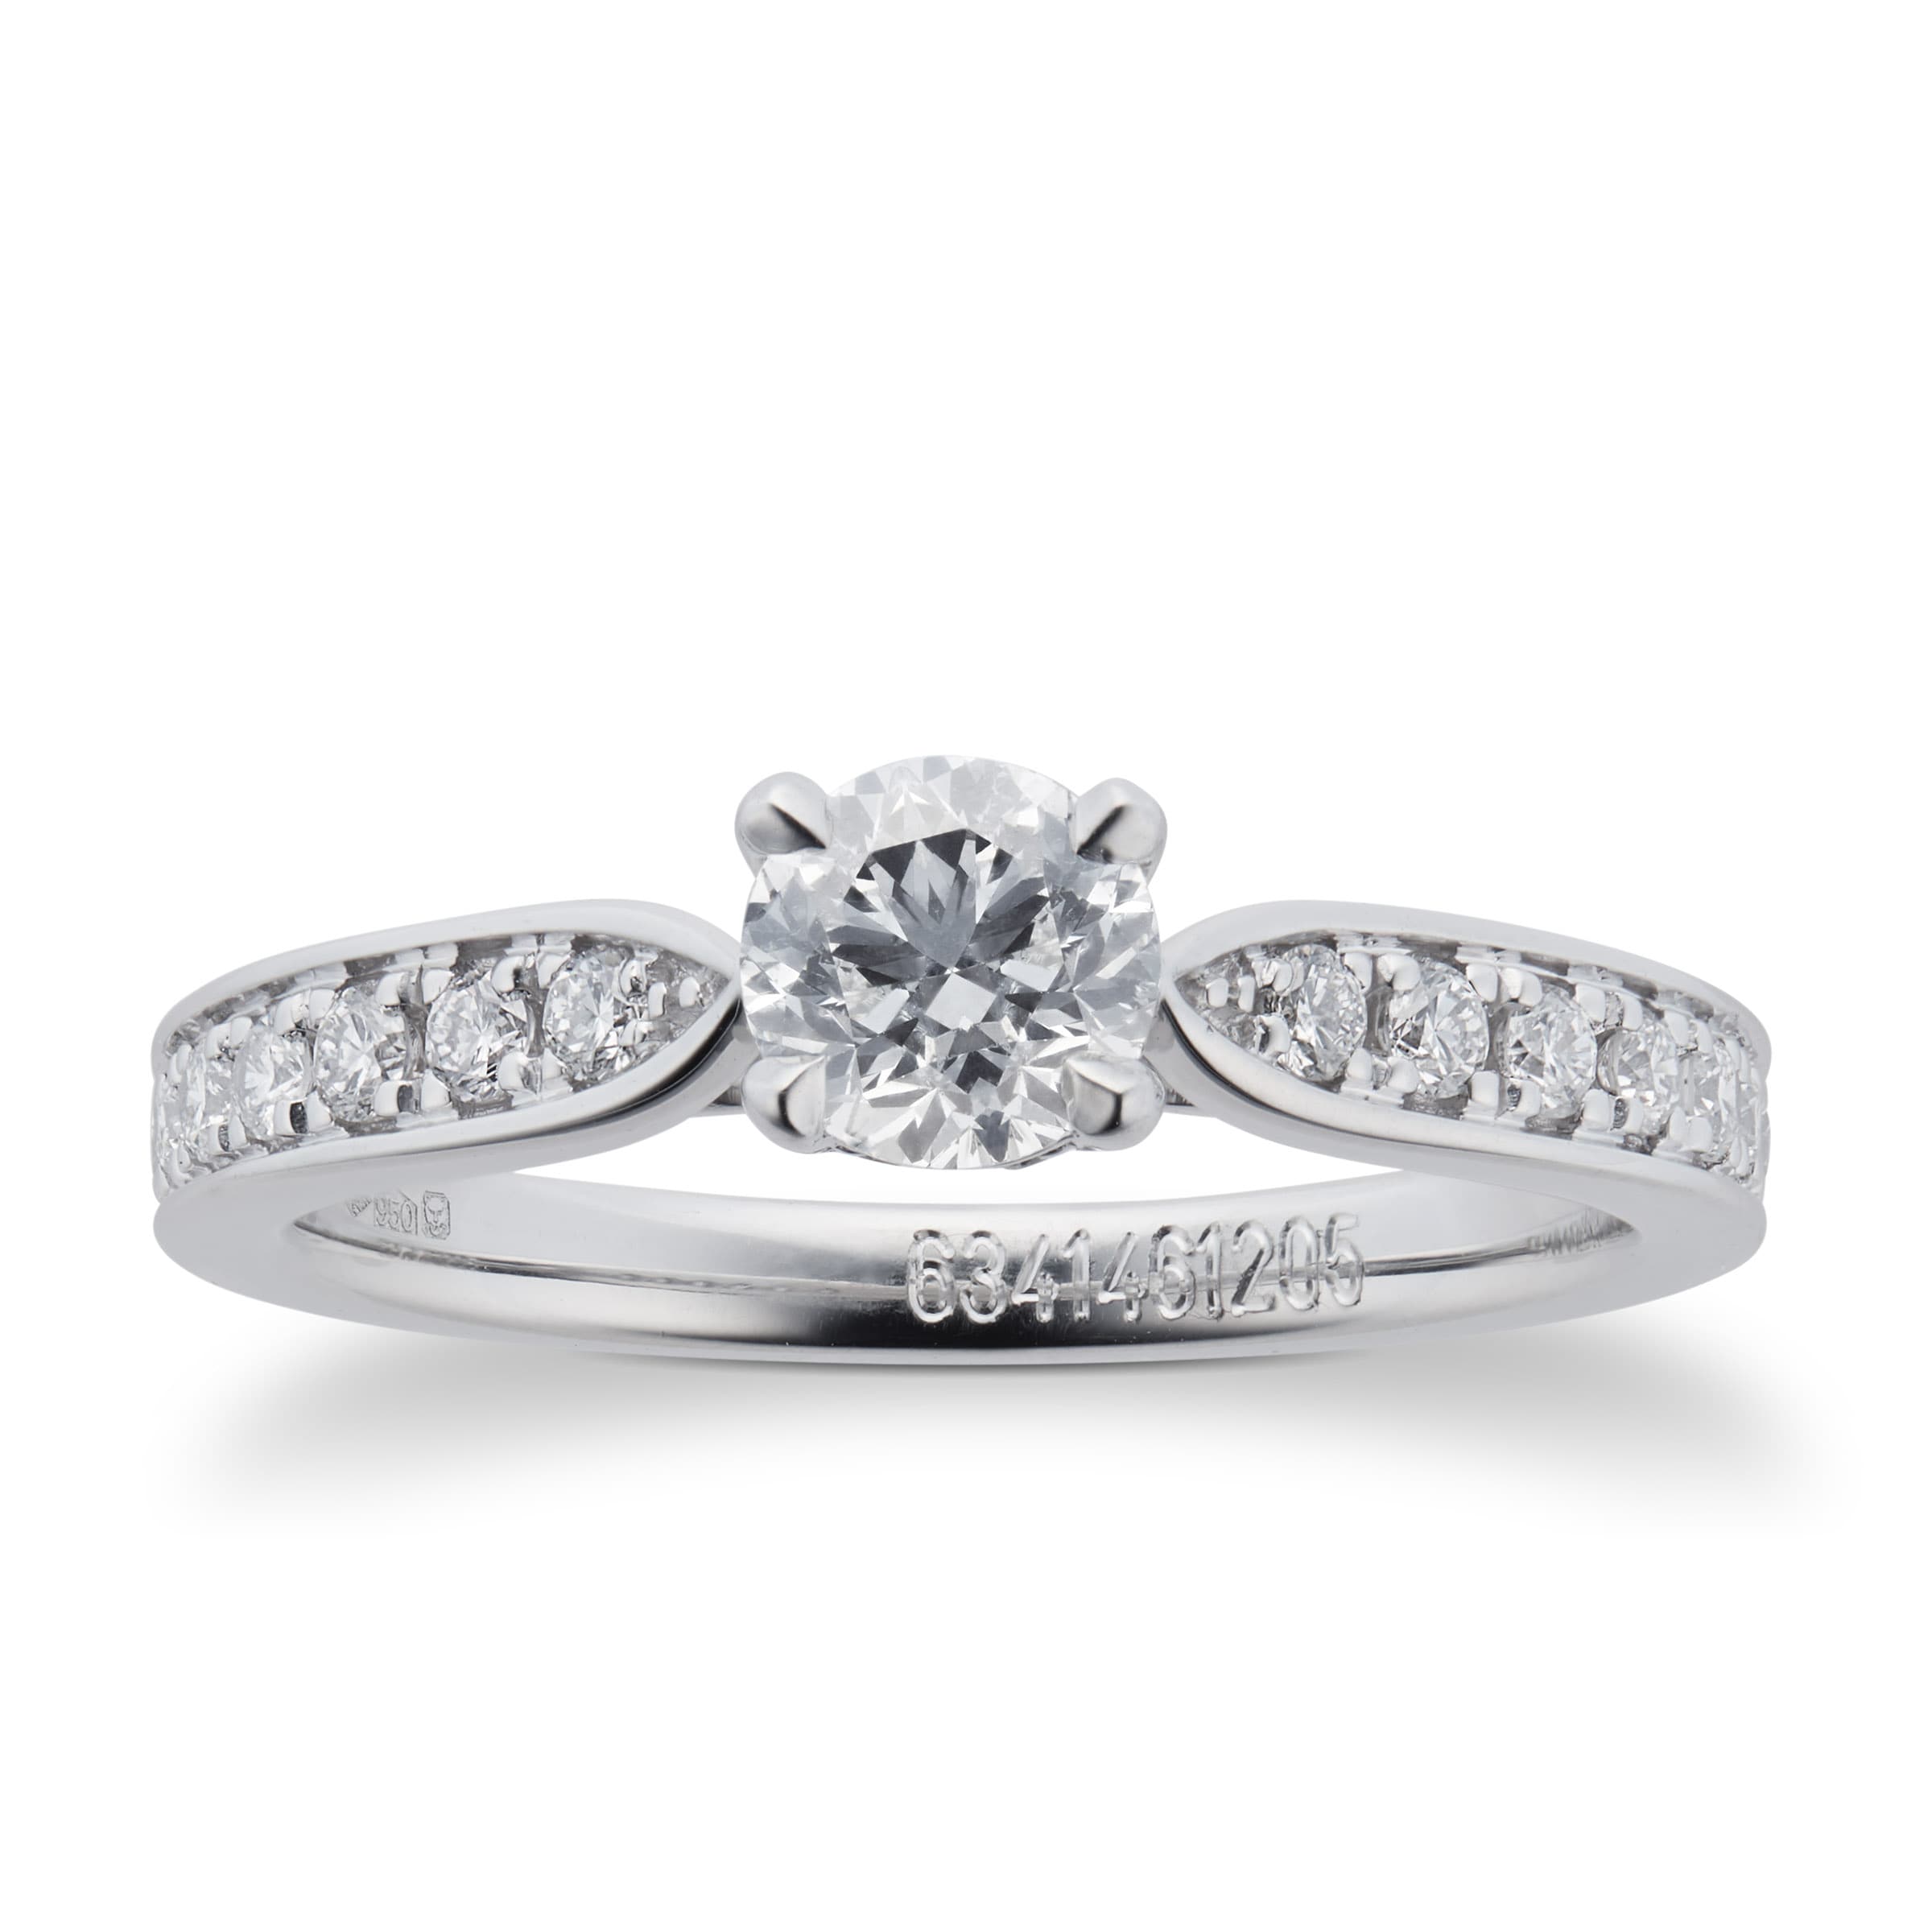 Find Wedding Rings, Jewellery & Accessories near you | Guides for Brides